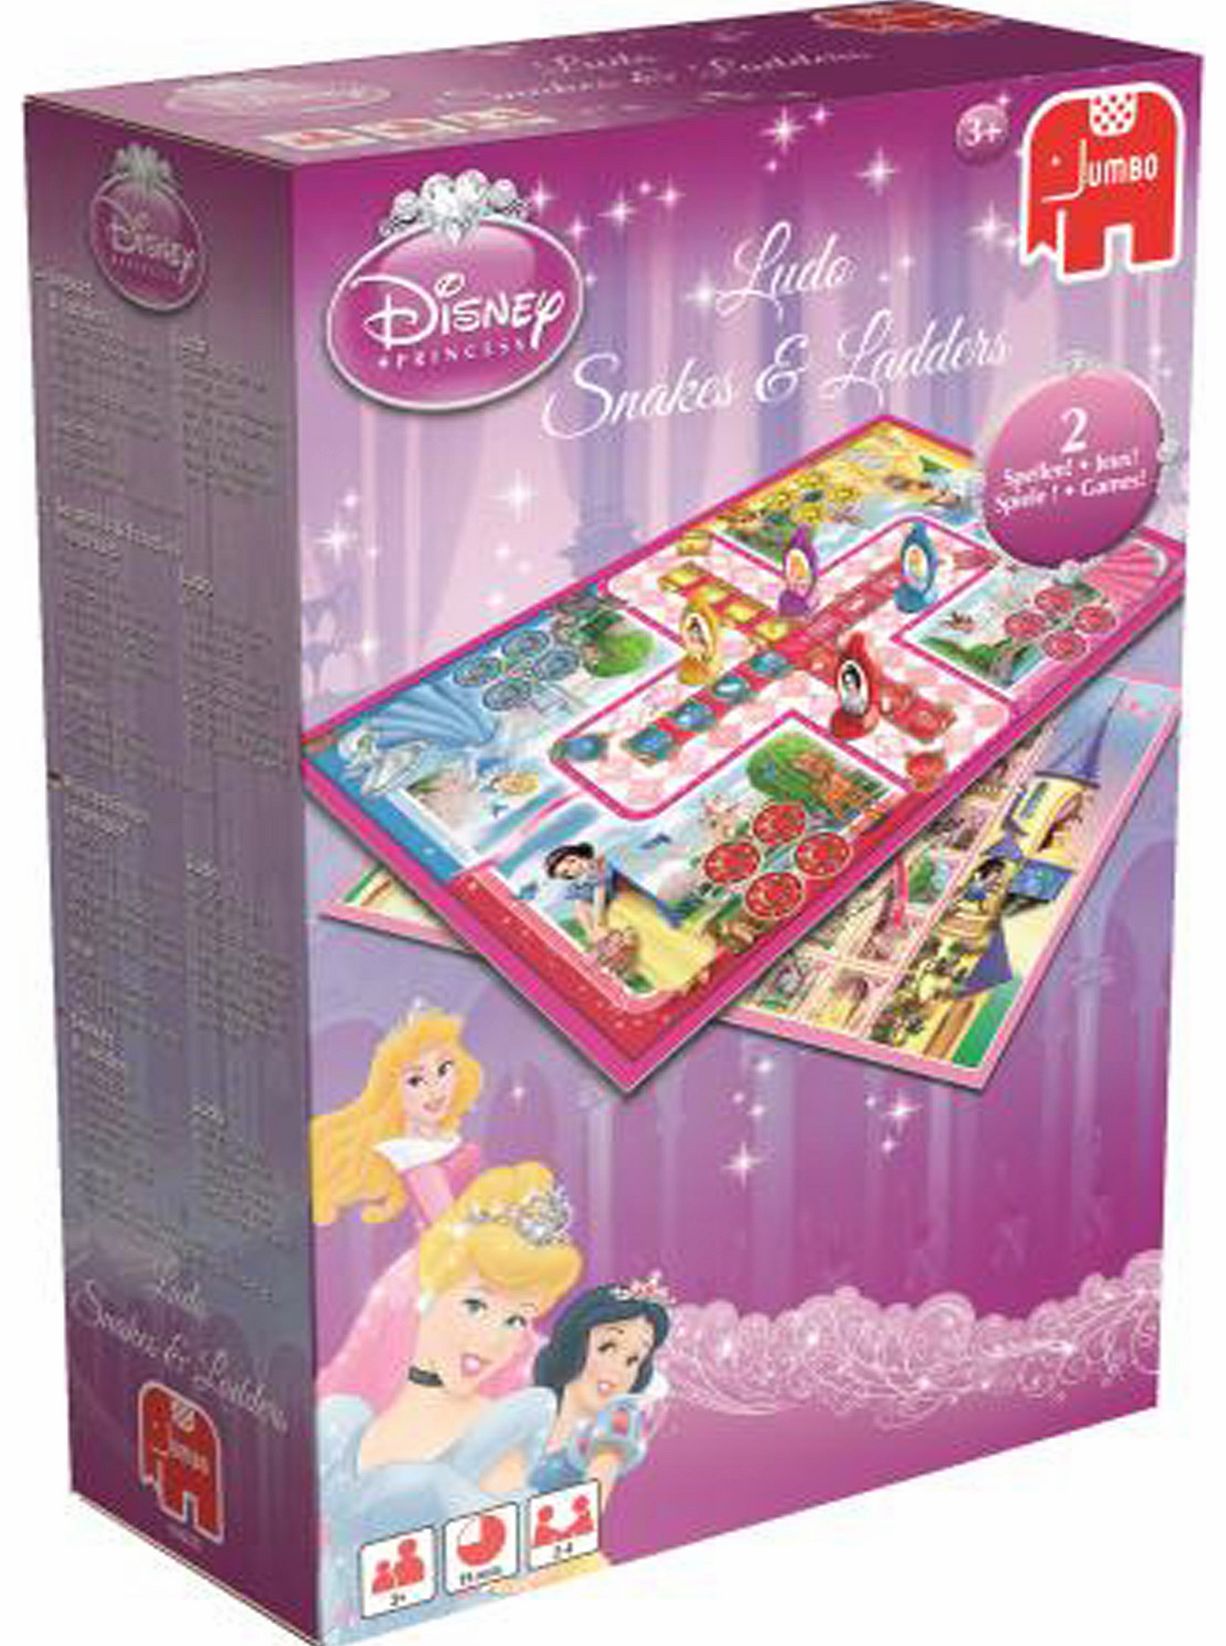 Disney Princess 2-in-1 Snakes & Ladders and Ludo